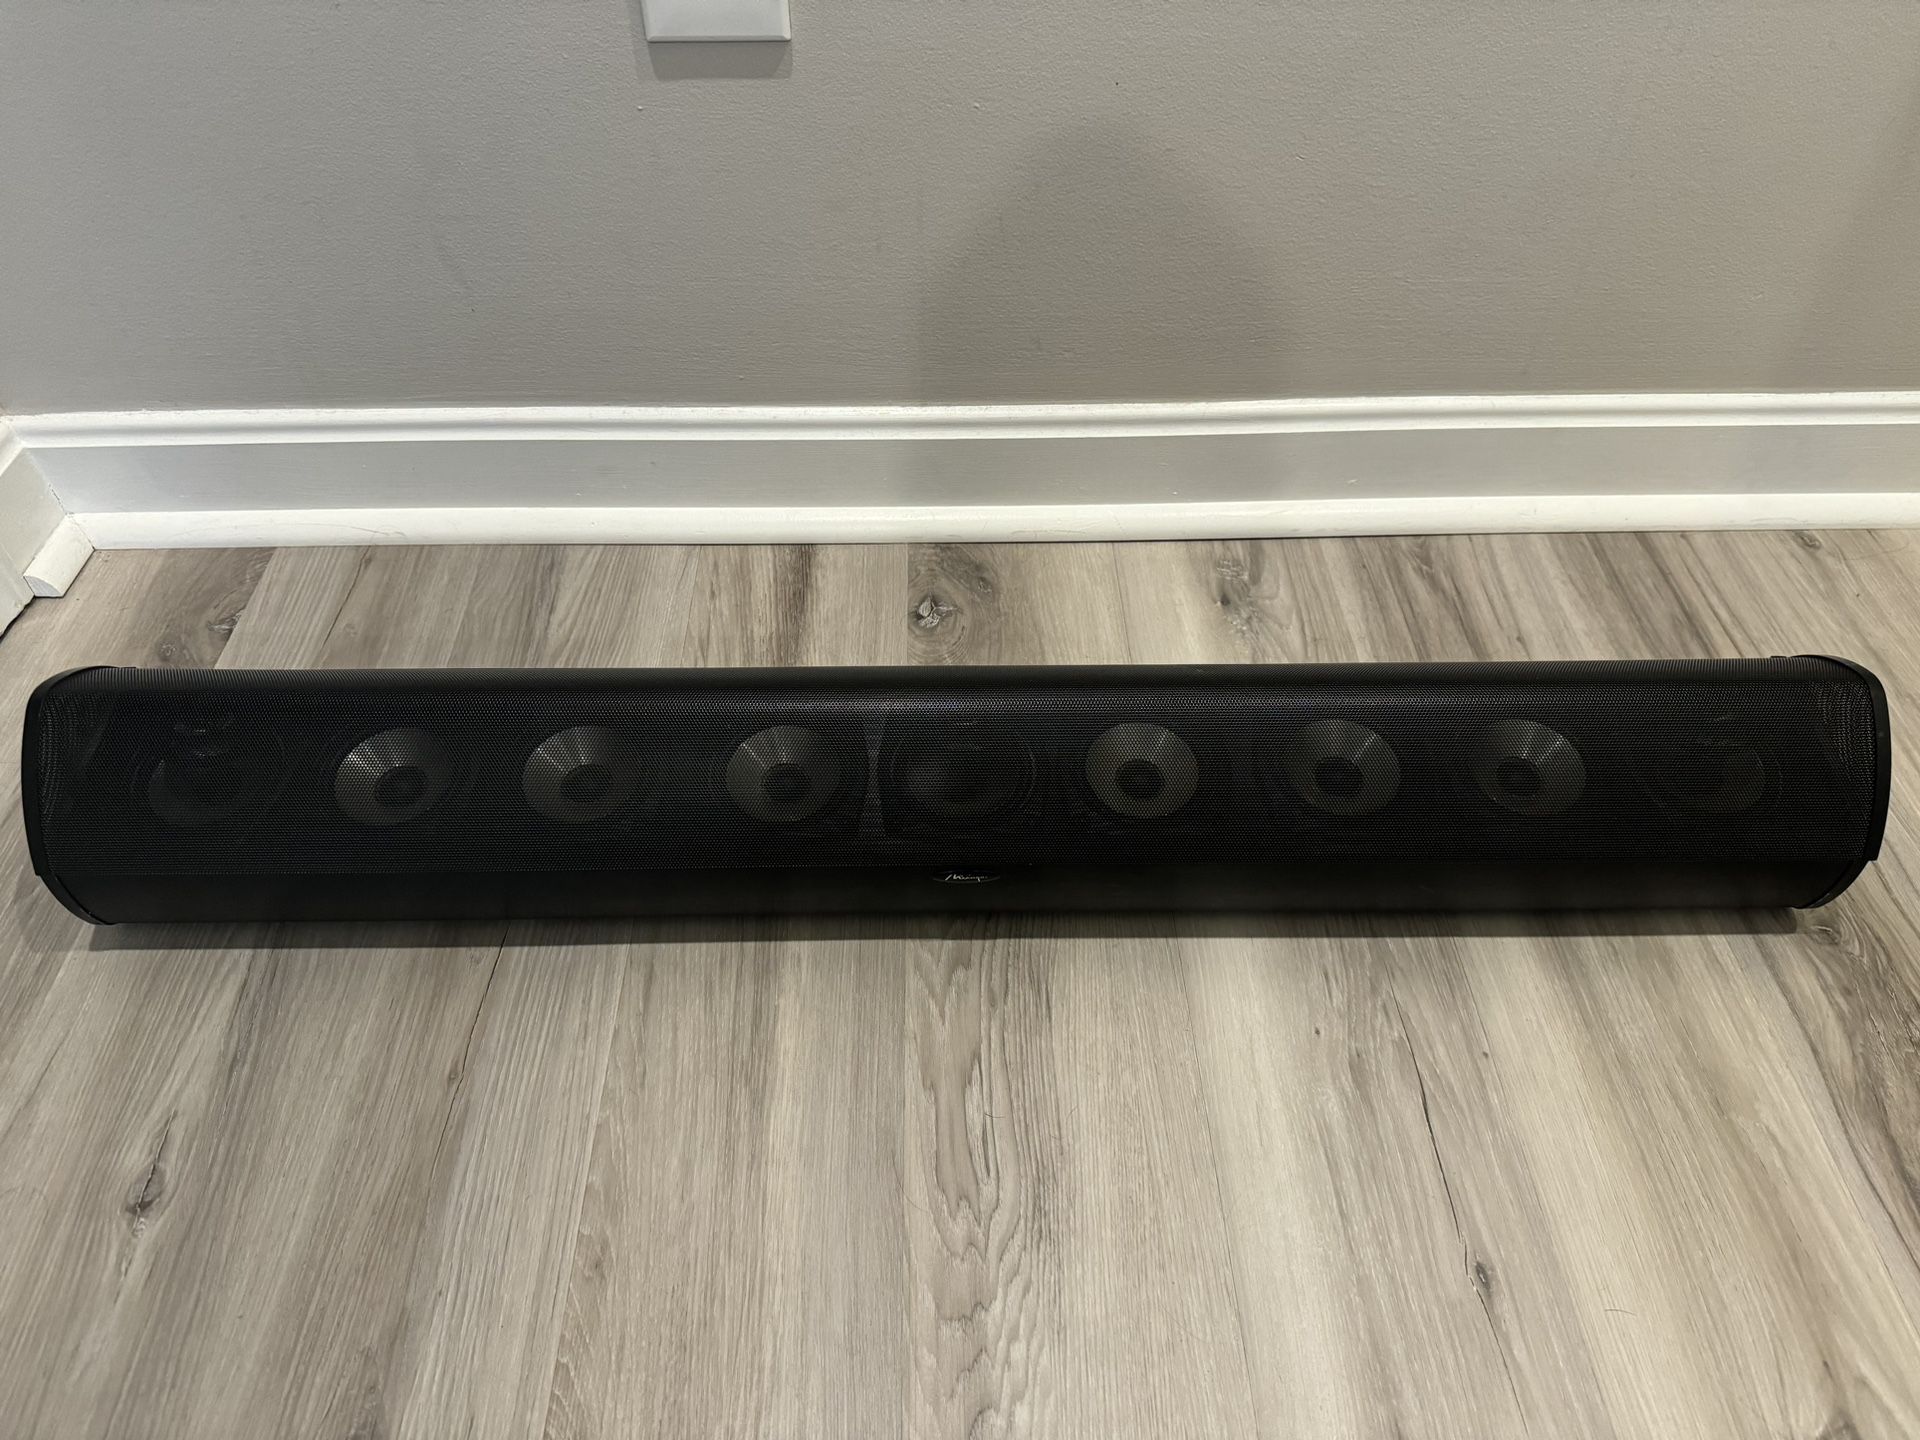 Mirage Uni Theater (UNI-TIB-1) 3 In 1 Sound Bar (Serves as left, center, and right channel speakers)